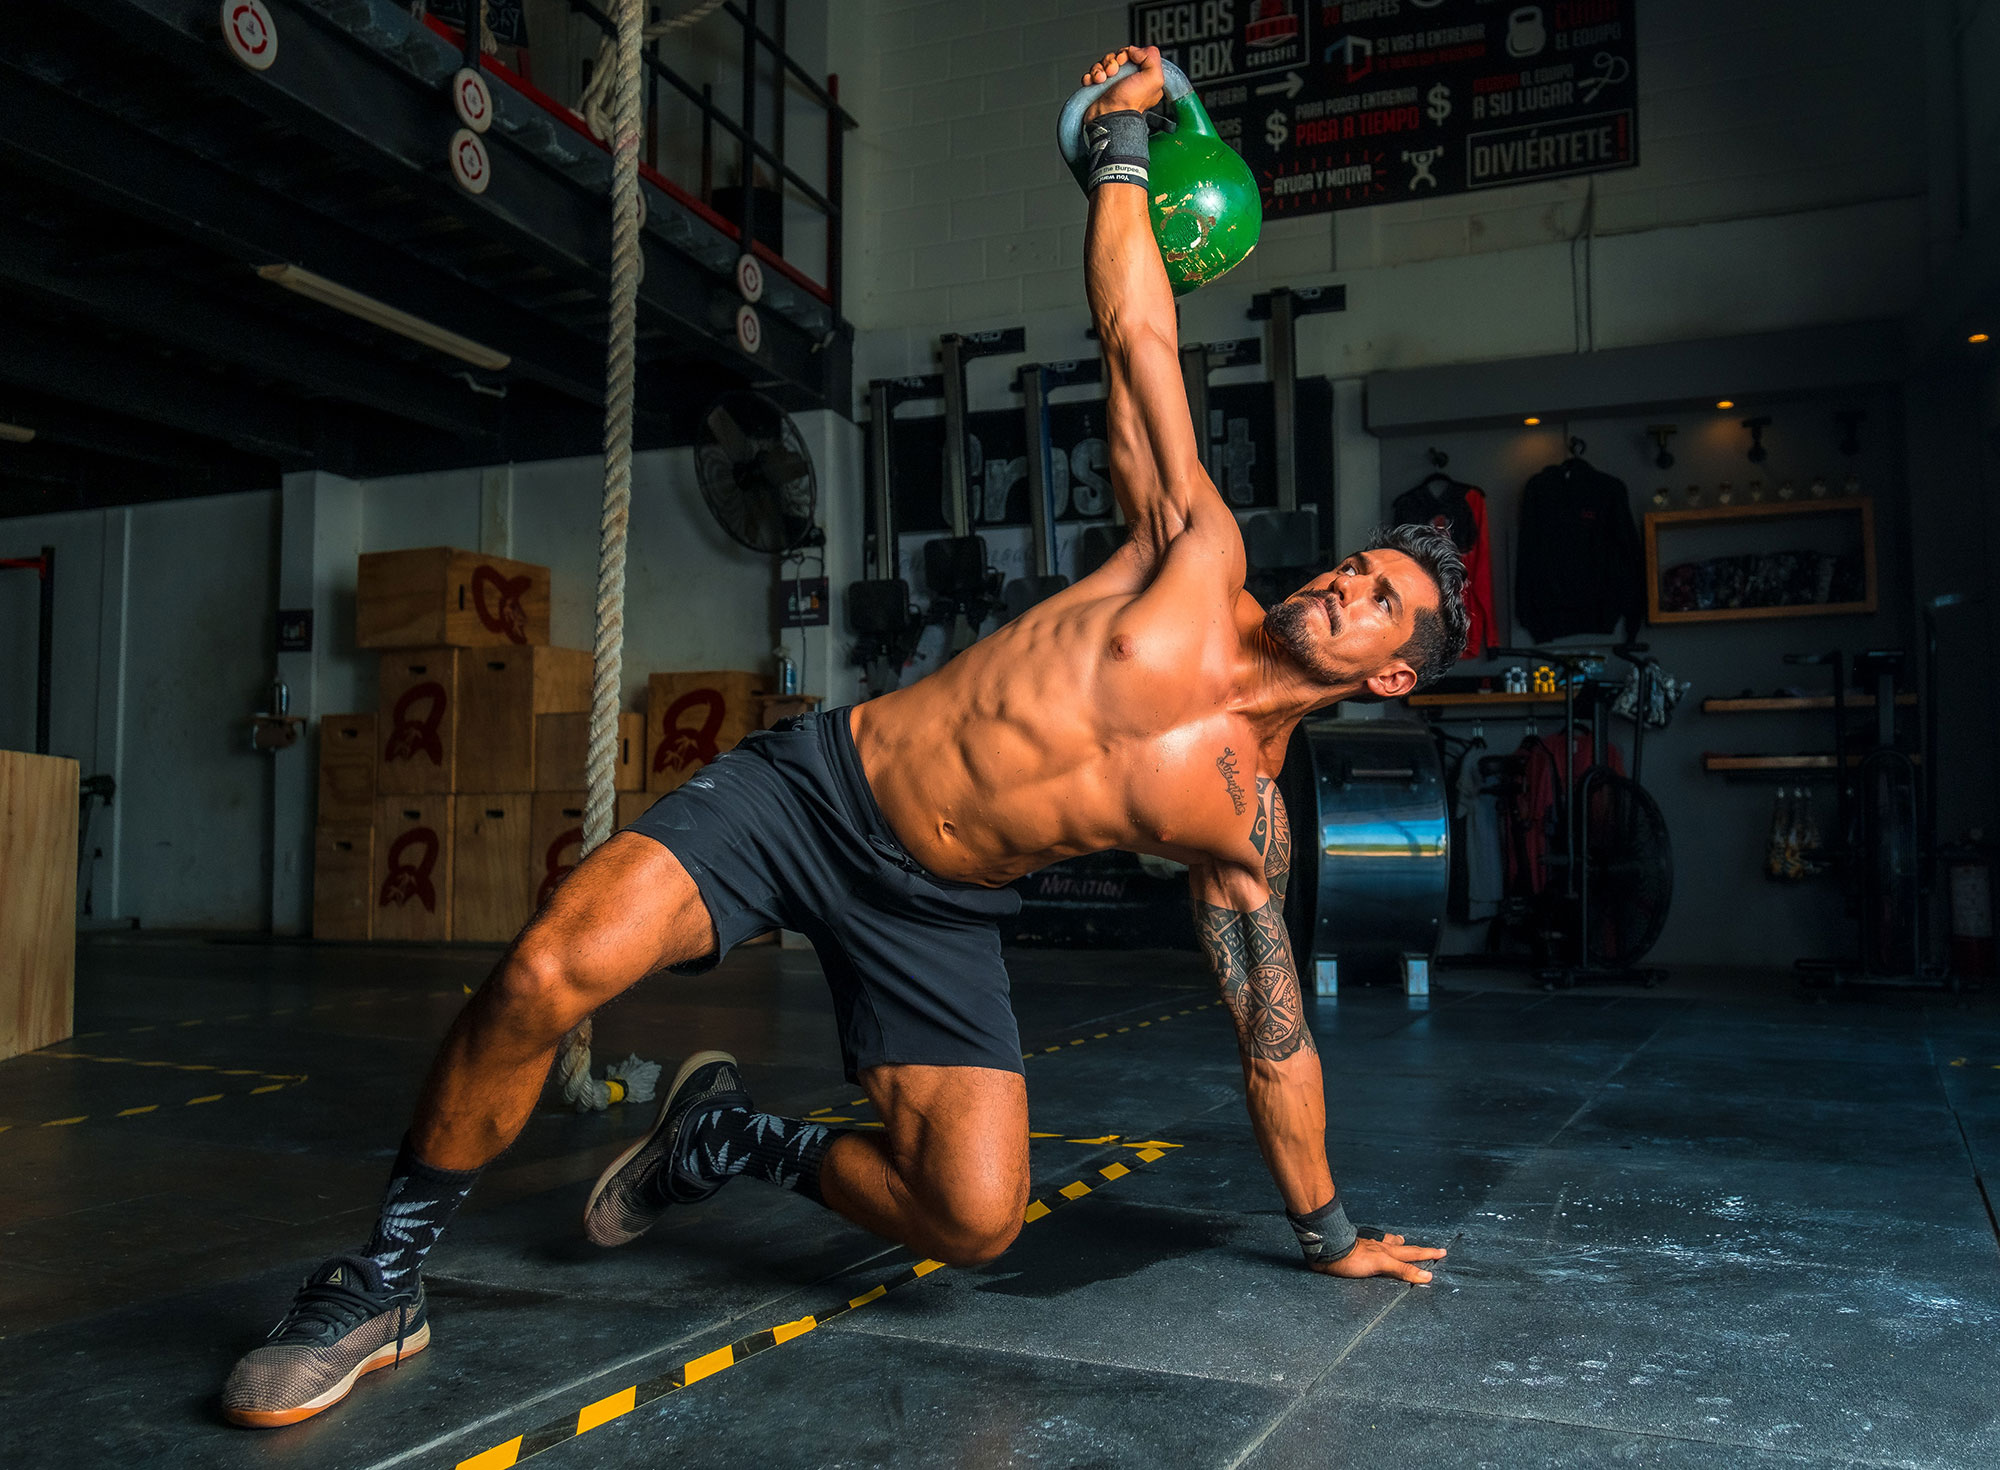 man kettlebell training with strong abs